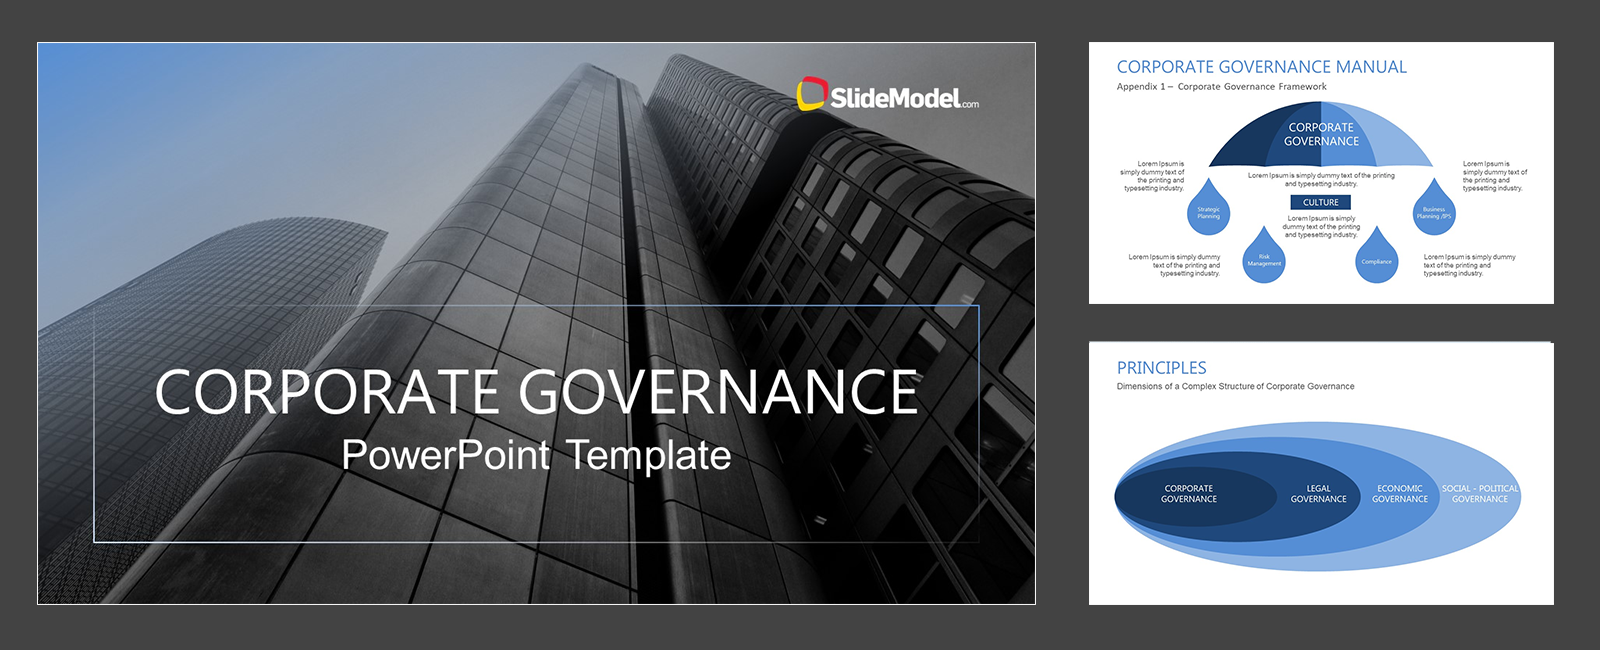 Corporate Governance PowerPoint template